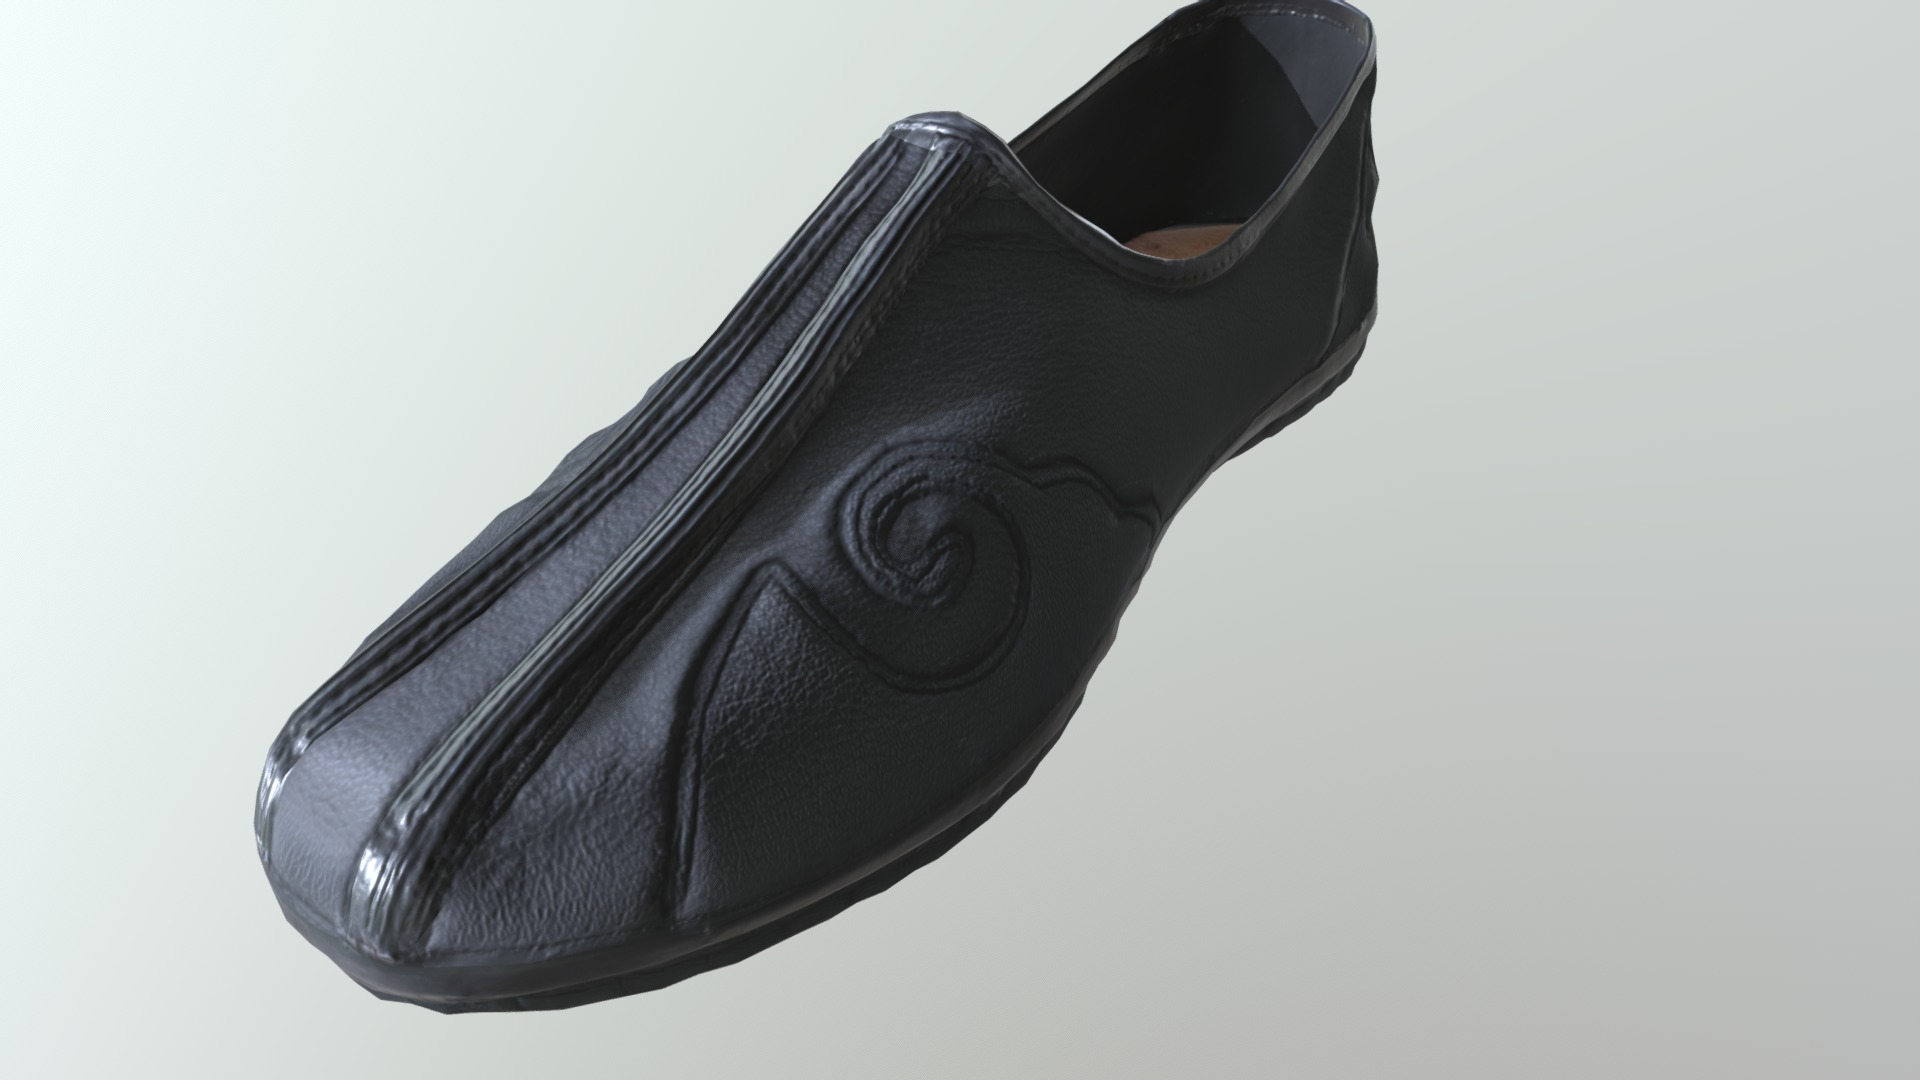 3D model Chinese style shoe 平步青雲鞋 - This is a 3D model of the Chinese style shoe 平步青雲鞋. The 3D model is about a black stapler on a white background.